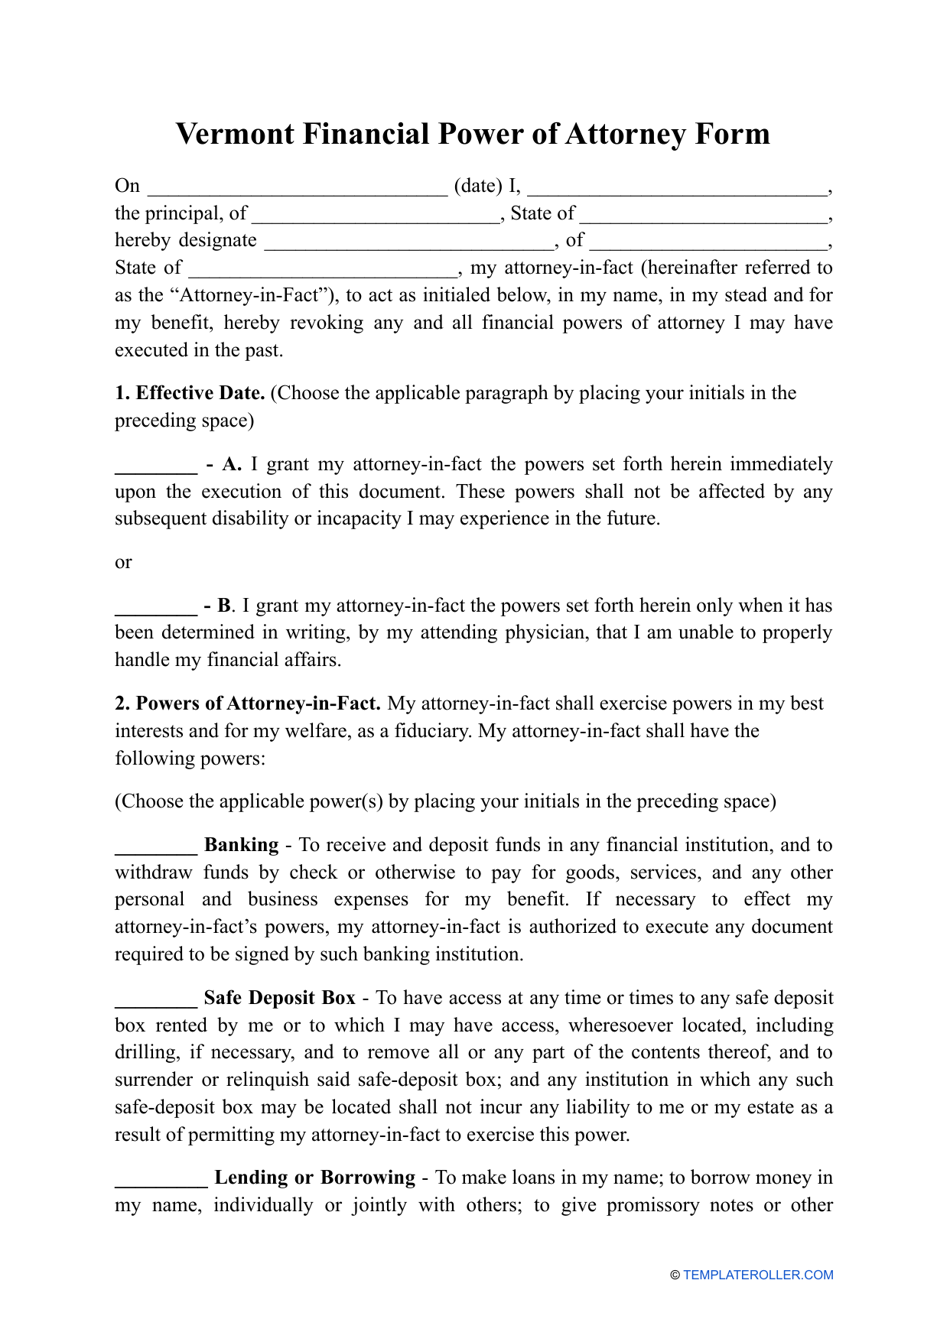 Financial Power of Attorney Form - Vermont, Page 1